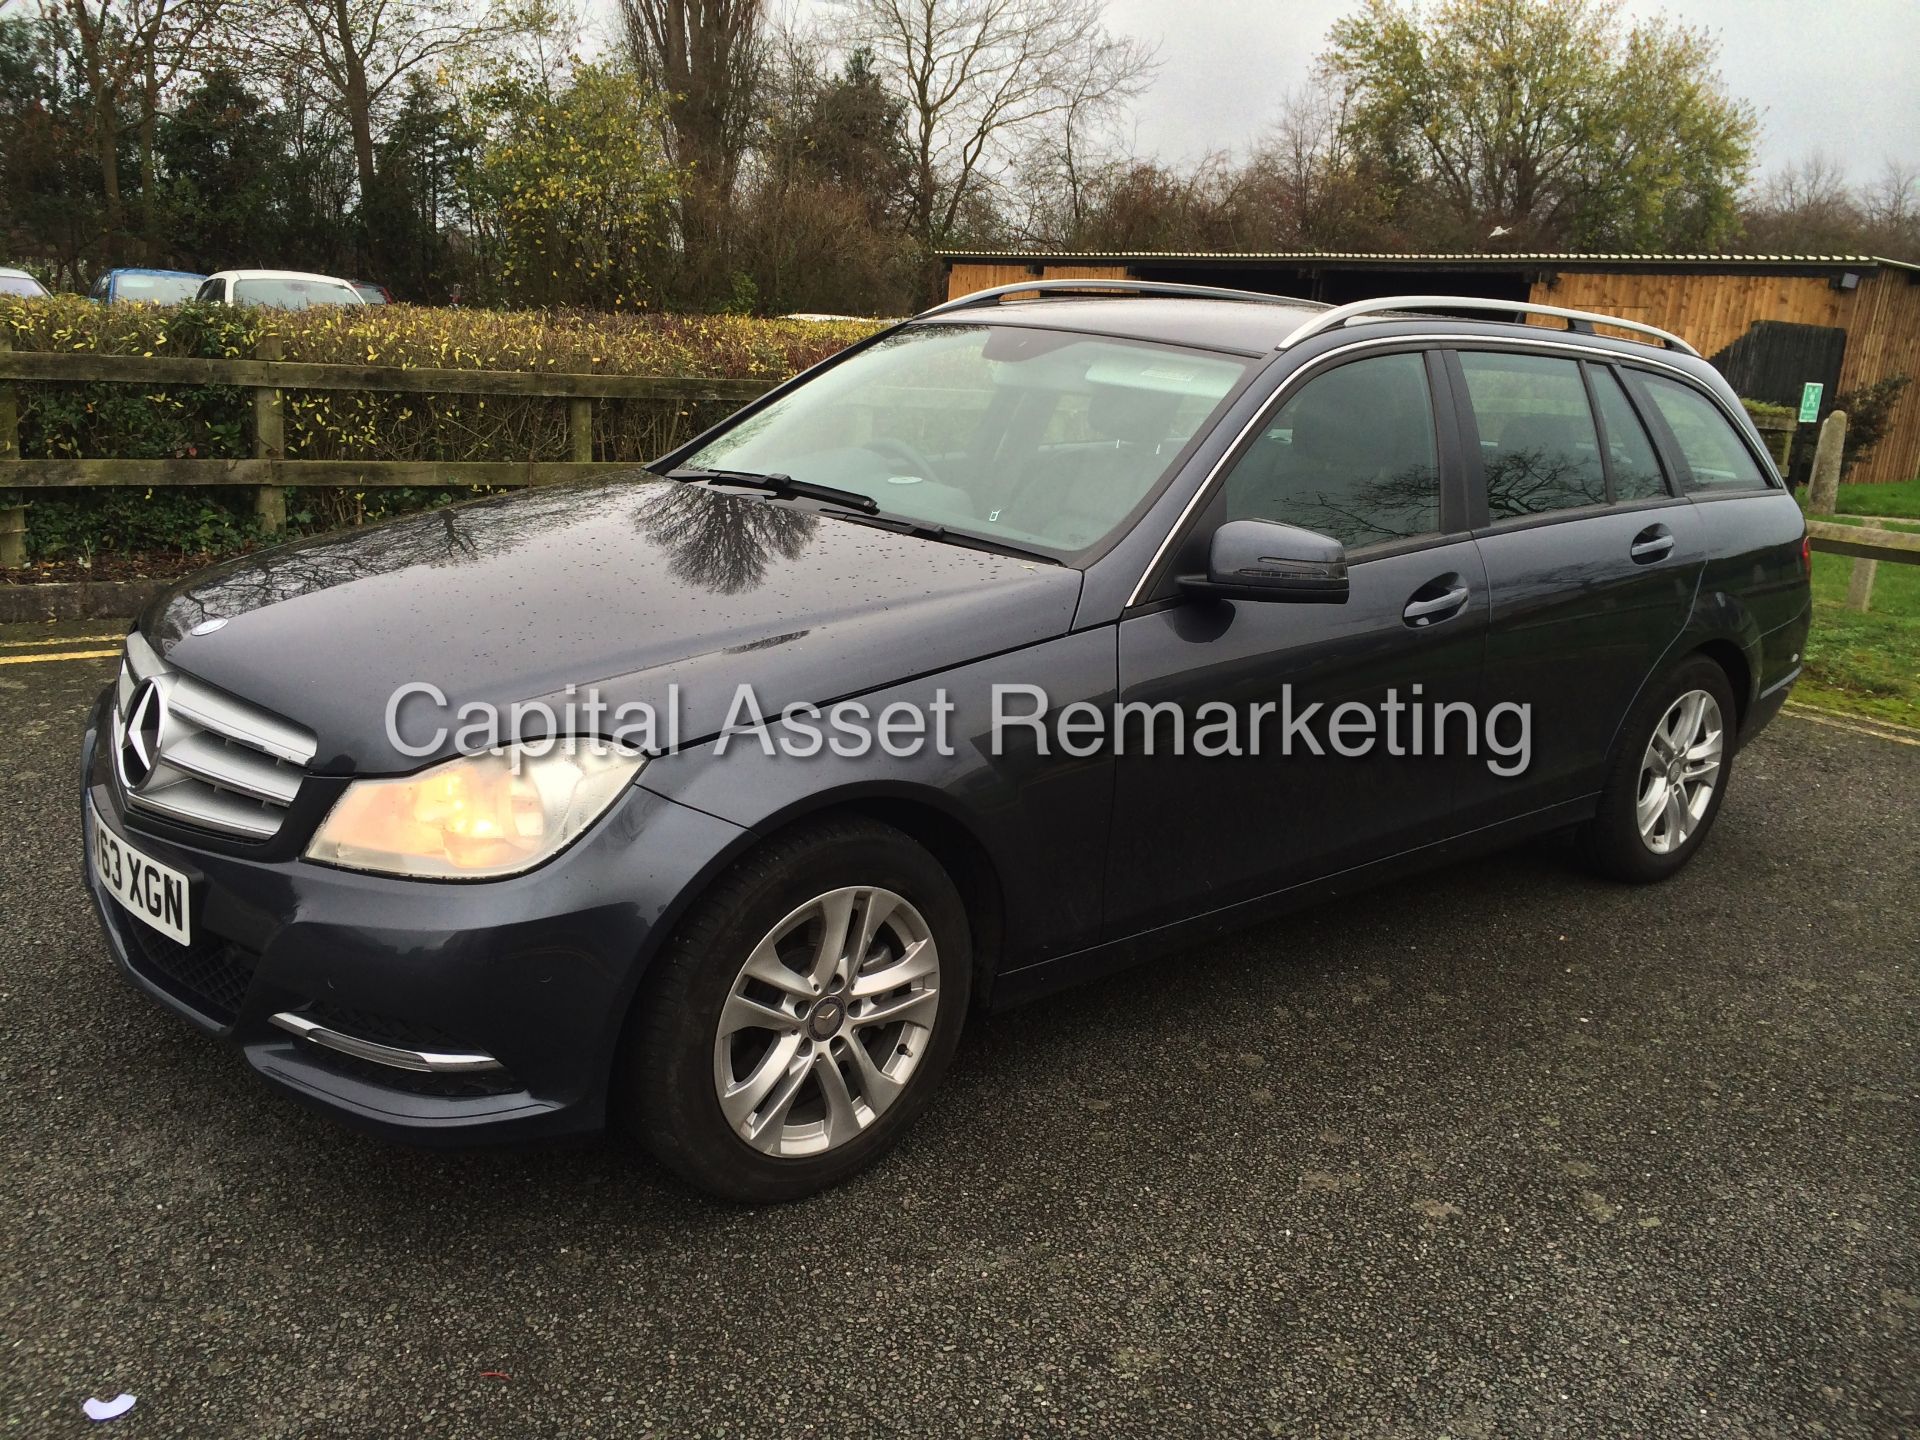 (ON SALE) MERCEDES-BENZ C220 CDI (2013 - 63 REG) 'BLUE EFFICIENCY' - 204 BHP (FACELIFT) LEATHER - Image 3 of 21